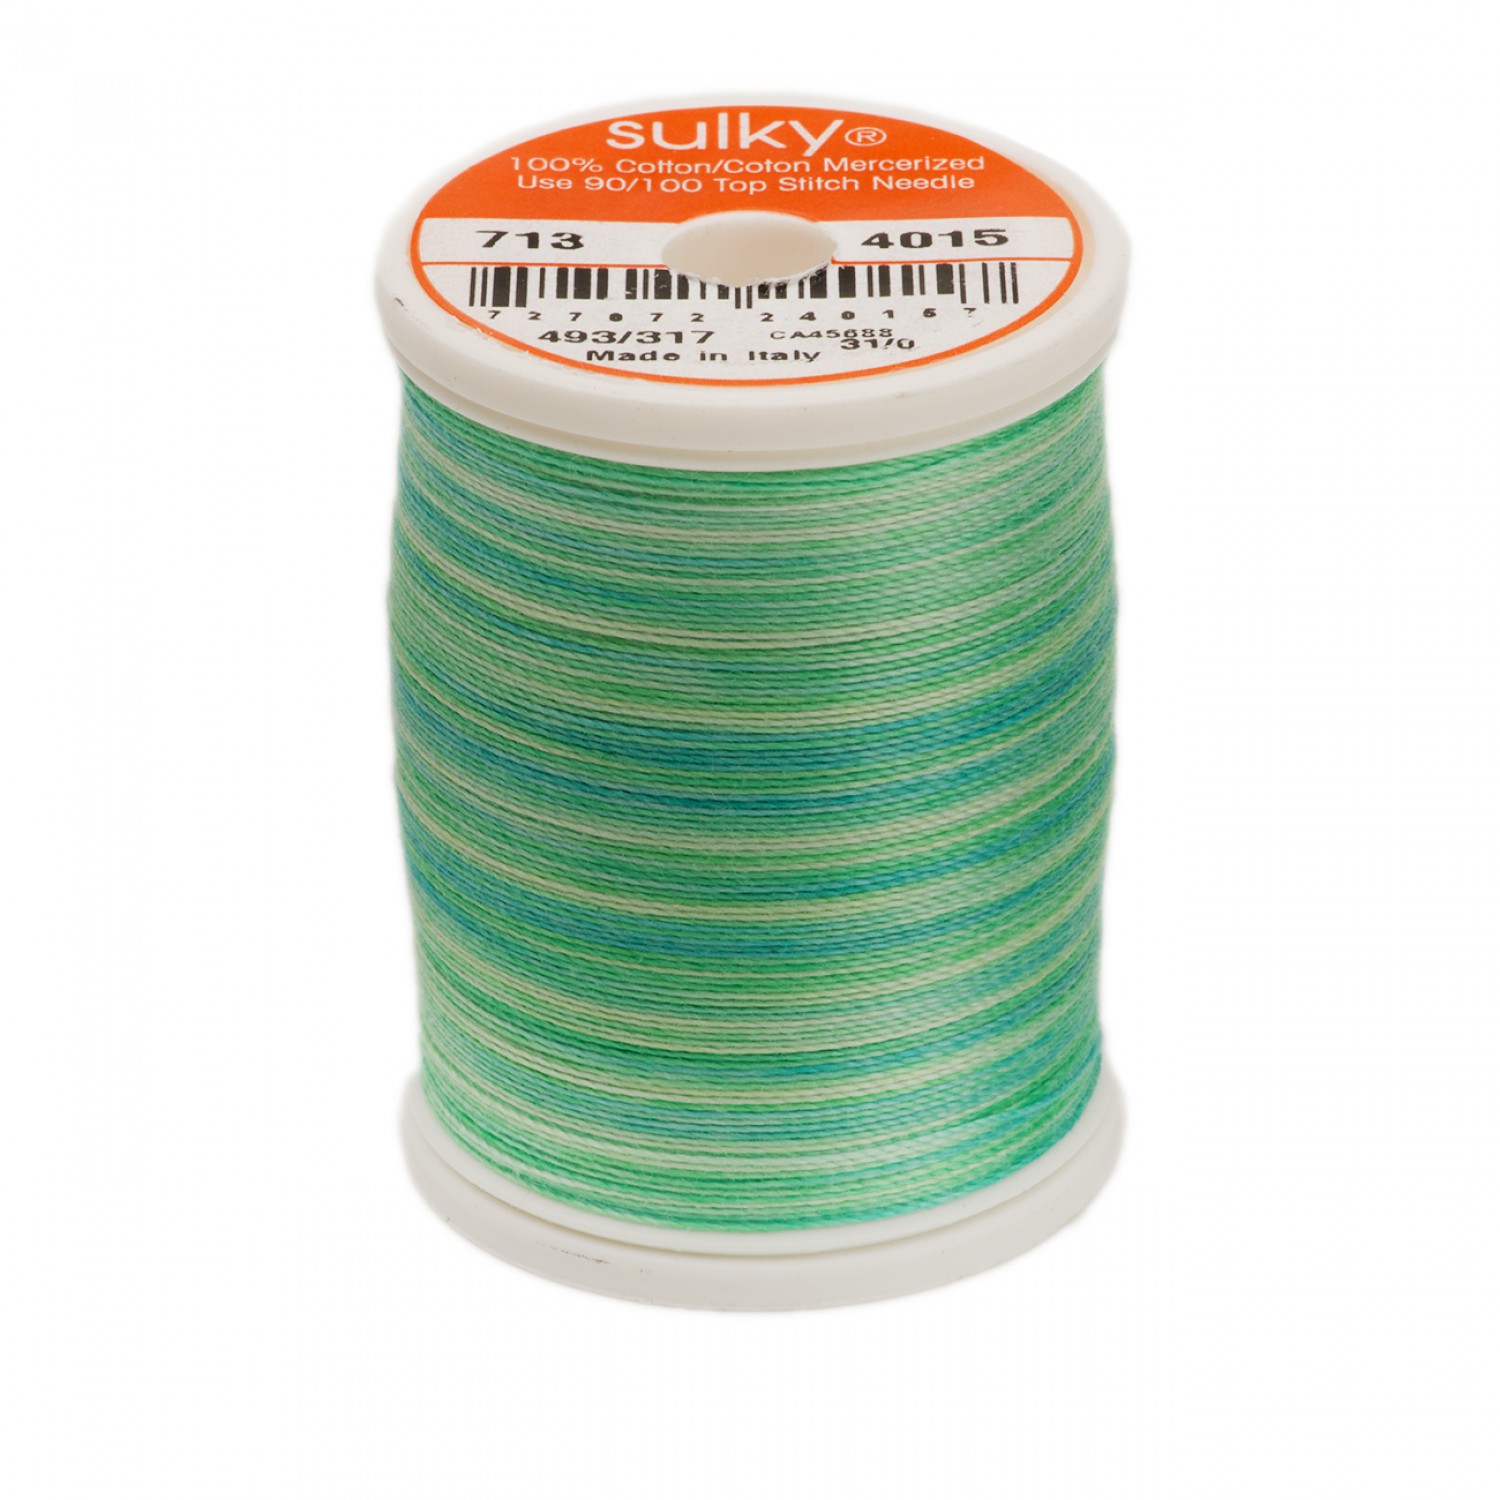 Sulky Blendables Cotton - Cool Waters 330 yards